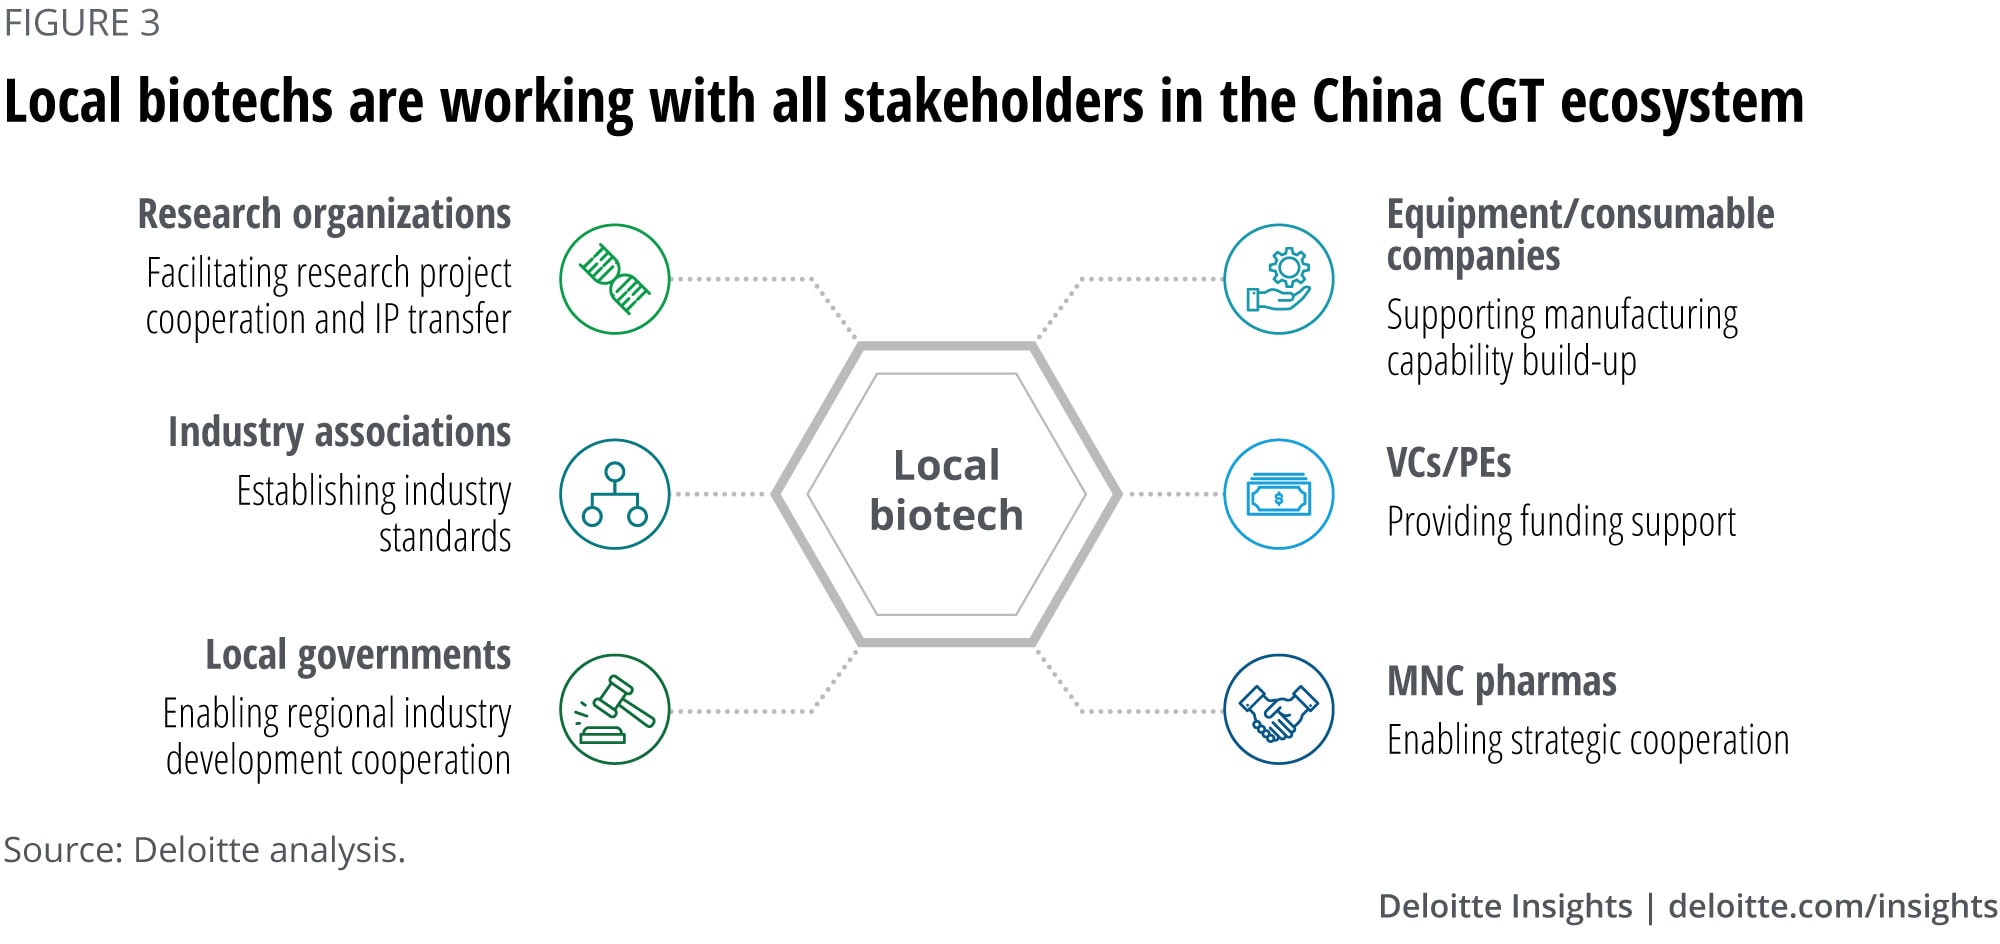 Local biotechs are at the core of the China CGT ecosystem